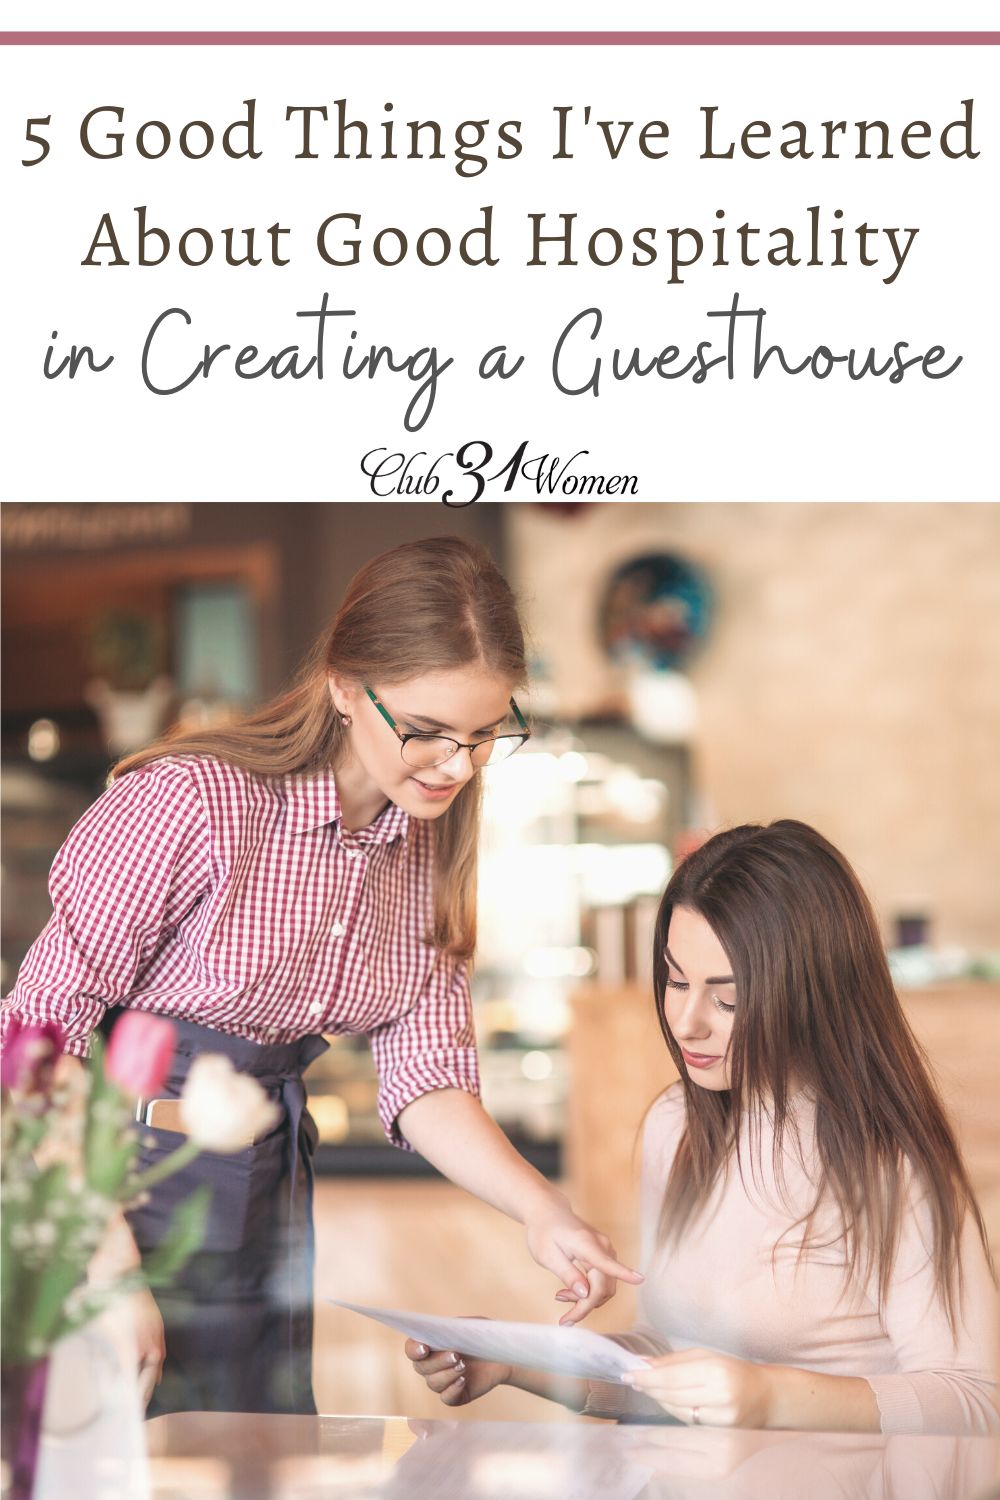 Good hospitality may not be your forte, but it's in the simplest ways that we can help our guests feel welcomed and cared for. via @Club31Women